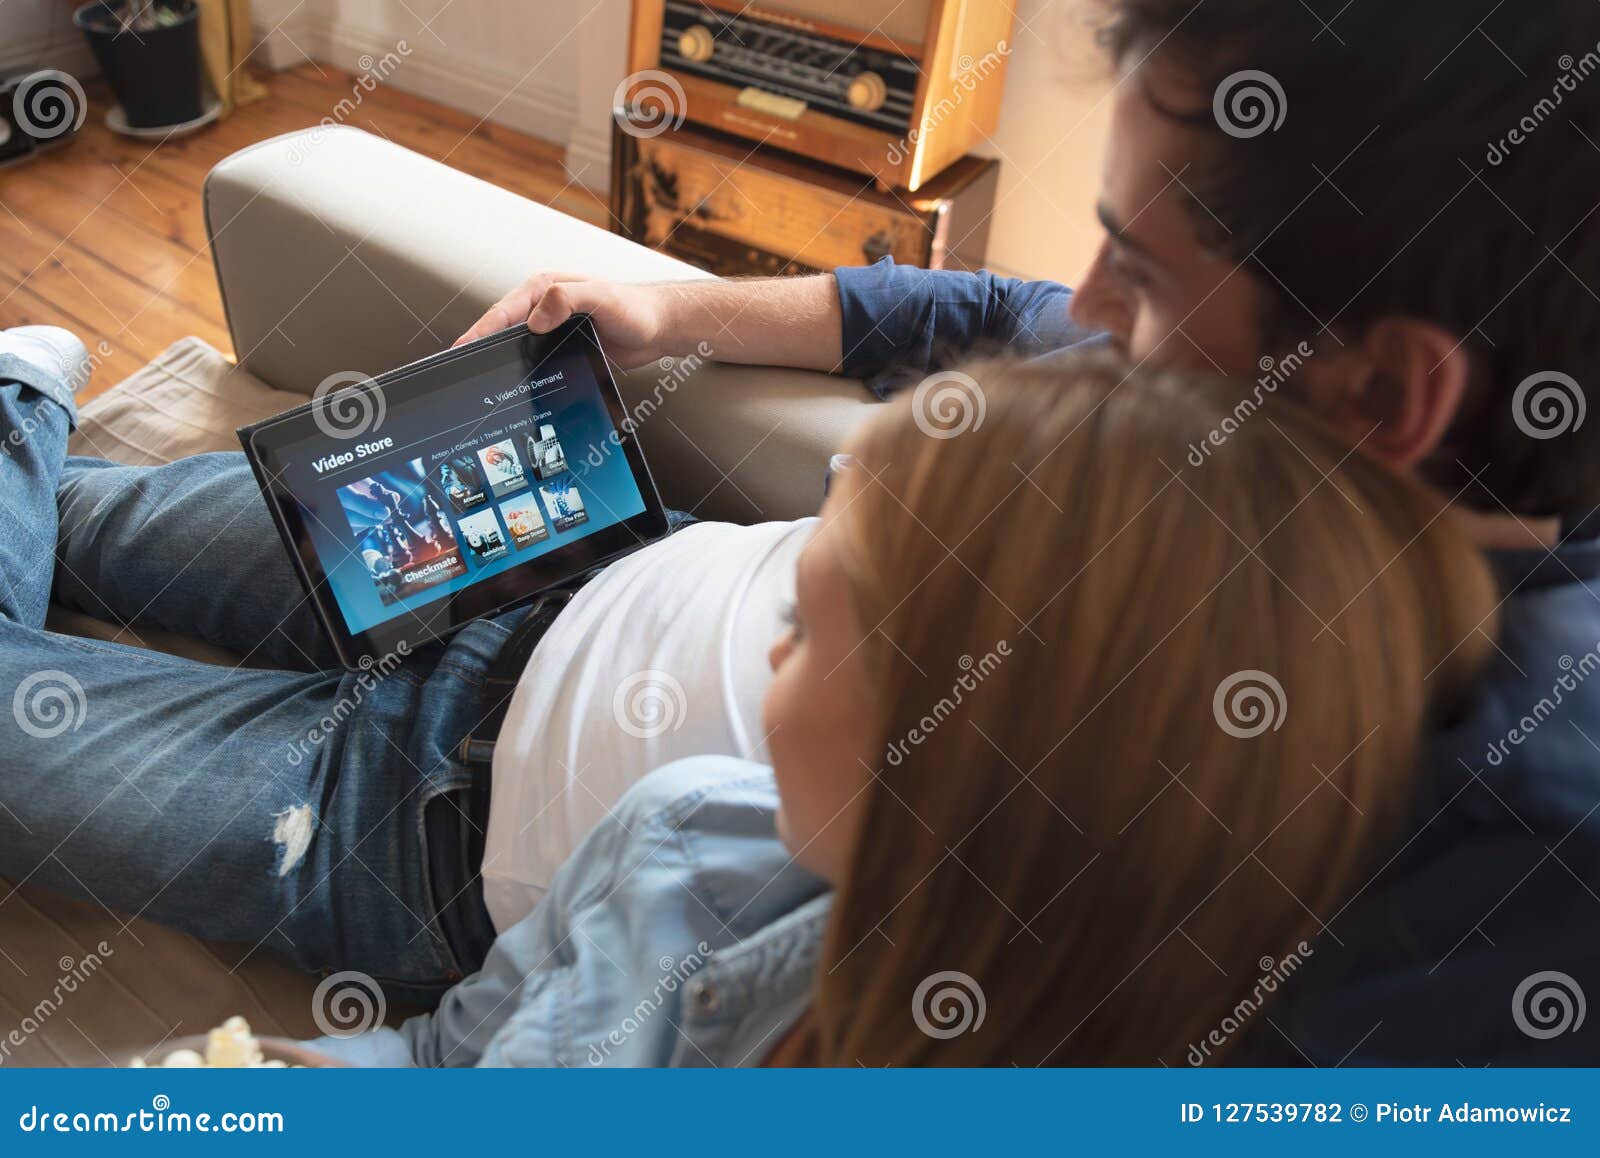 Couple Using Digital Tablet for Watching Movie on VOD Service Stock Photo